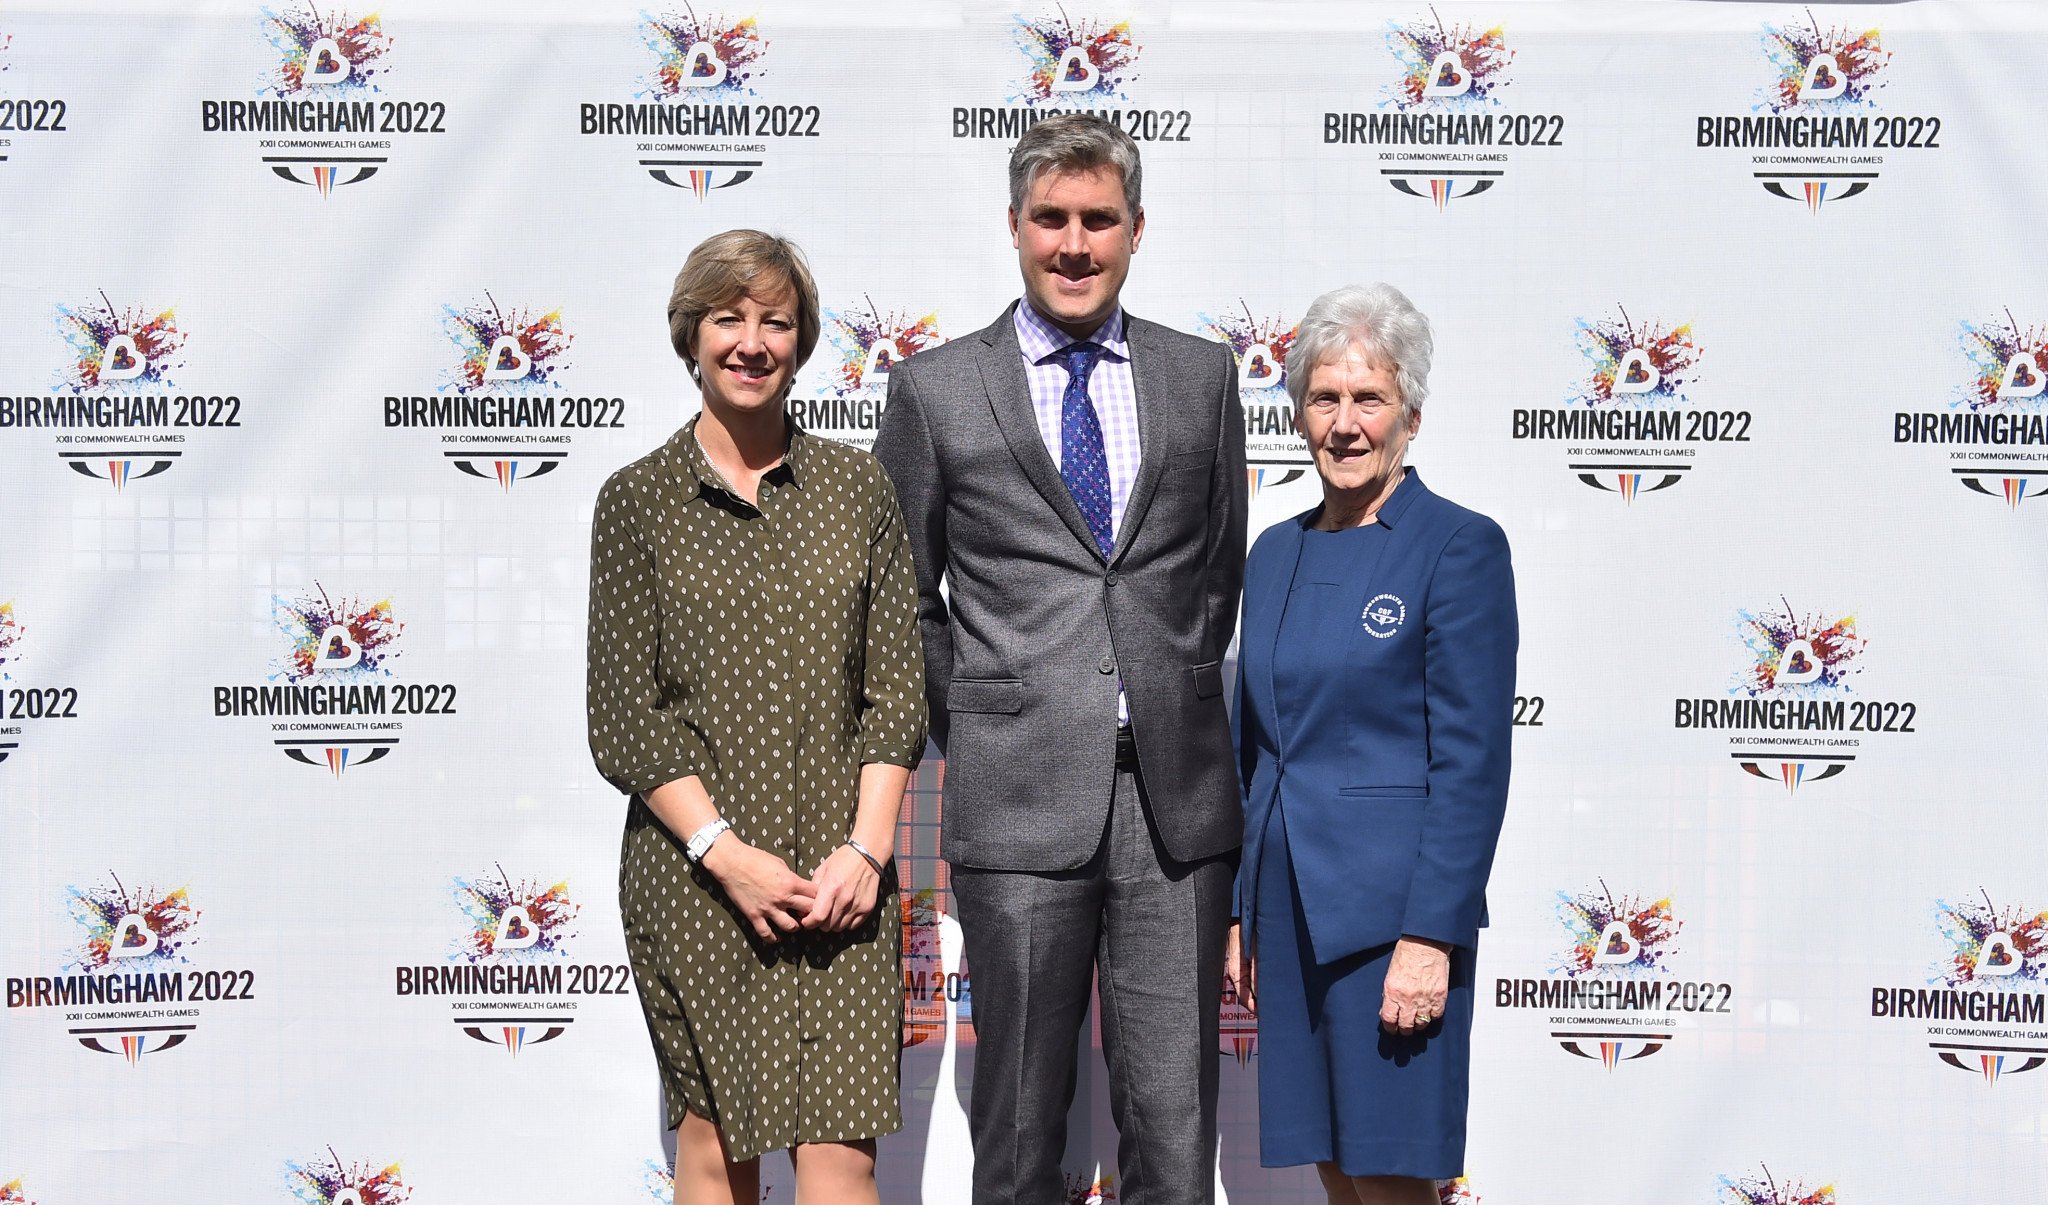 Birmingham 2022 chief executive Ian Reid, centre, says having the budget confirmed is a key milestone, while CGF President Dame Louise Martin, right, claims confirmation of the public investment reinforces the Commonwealth Games' position as a cost-efficient multi-sport event ©Getty Images